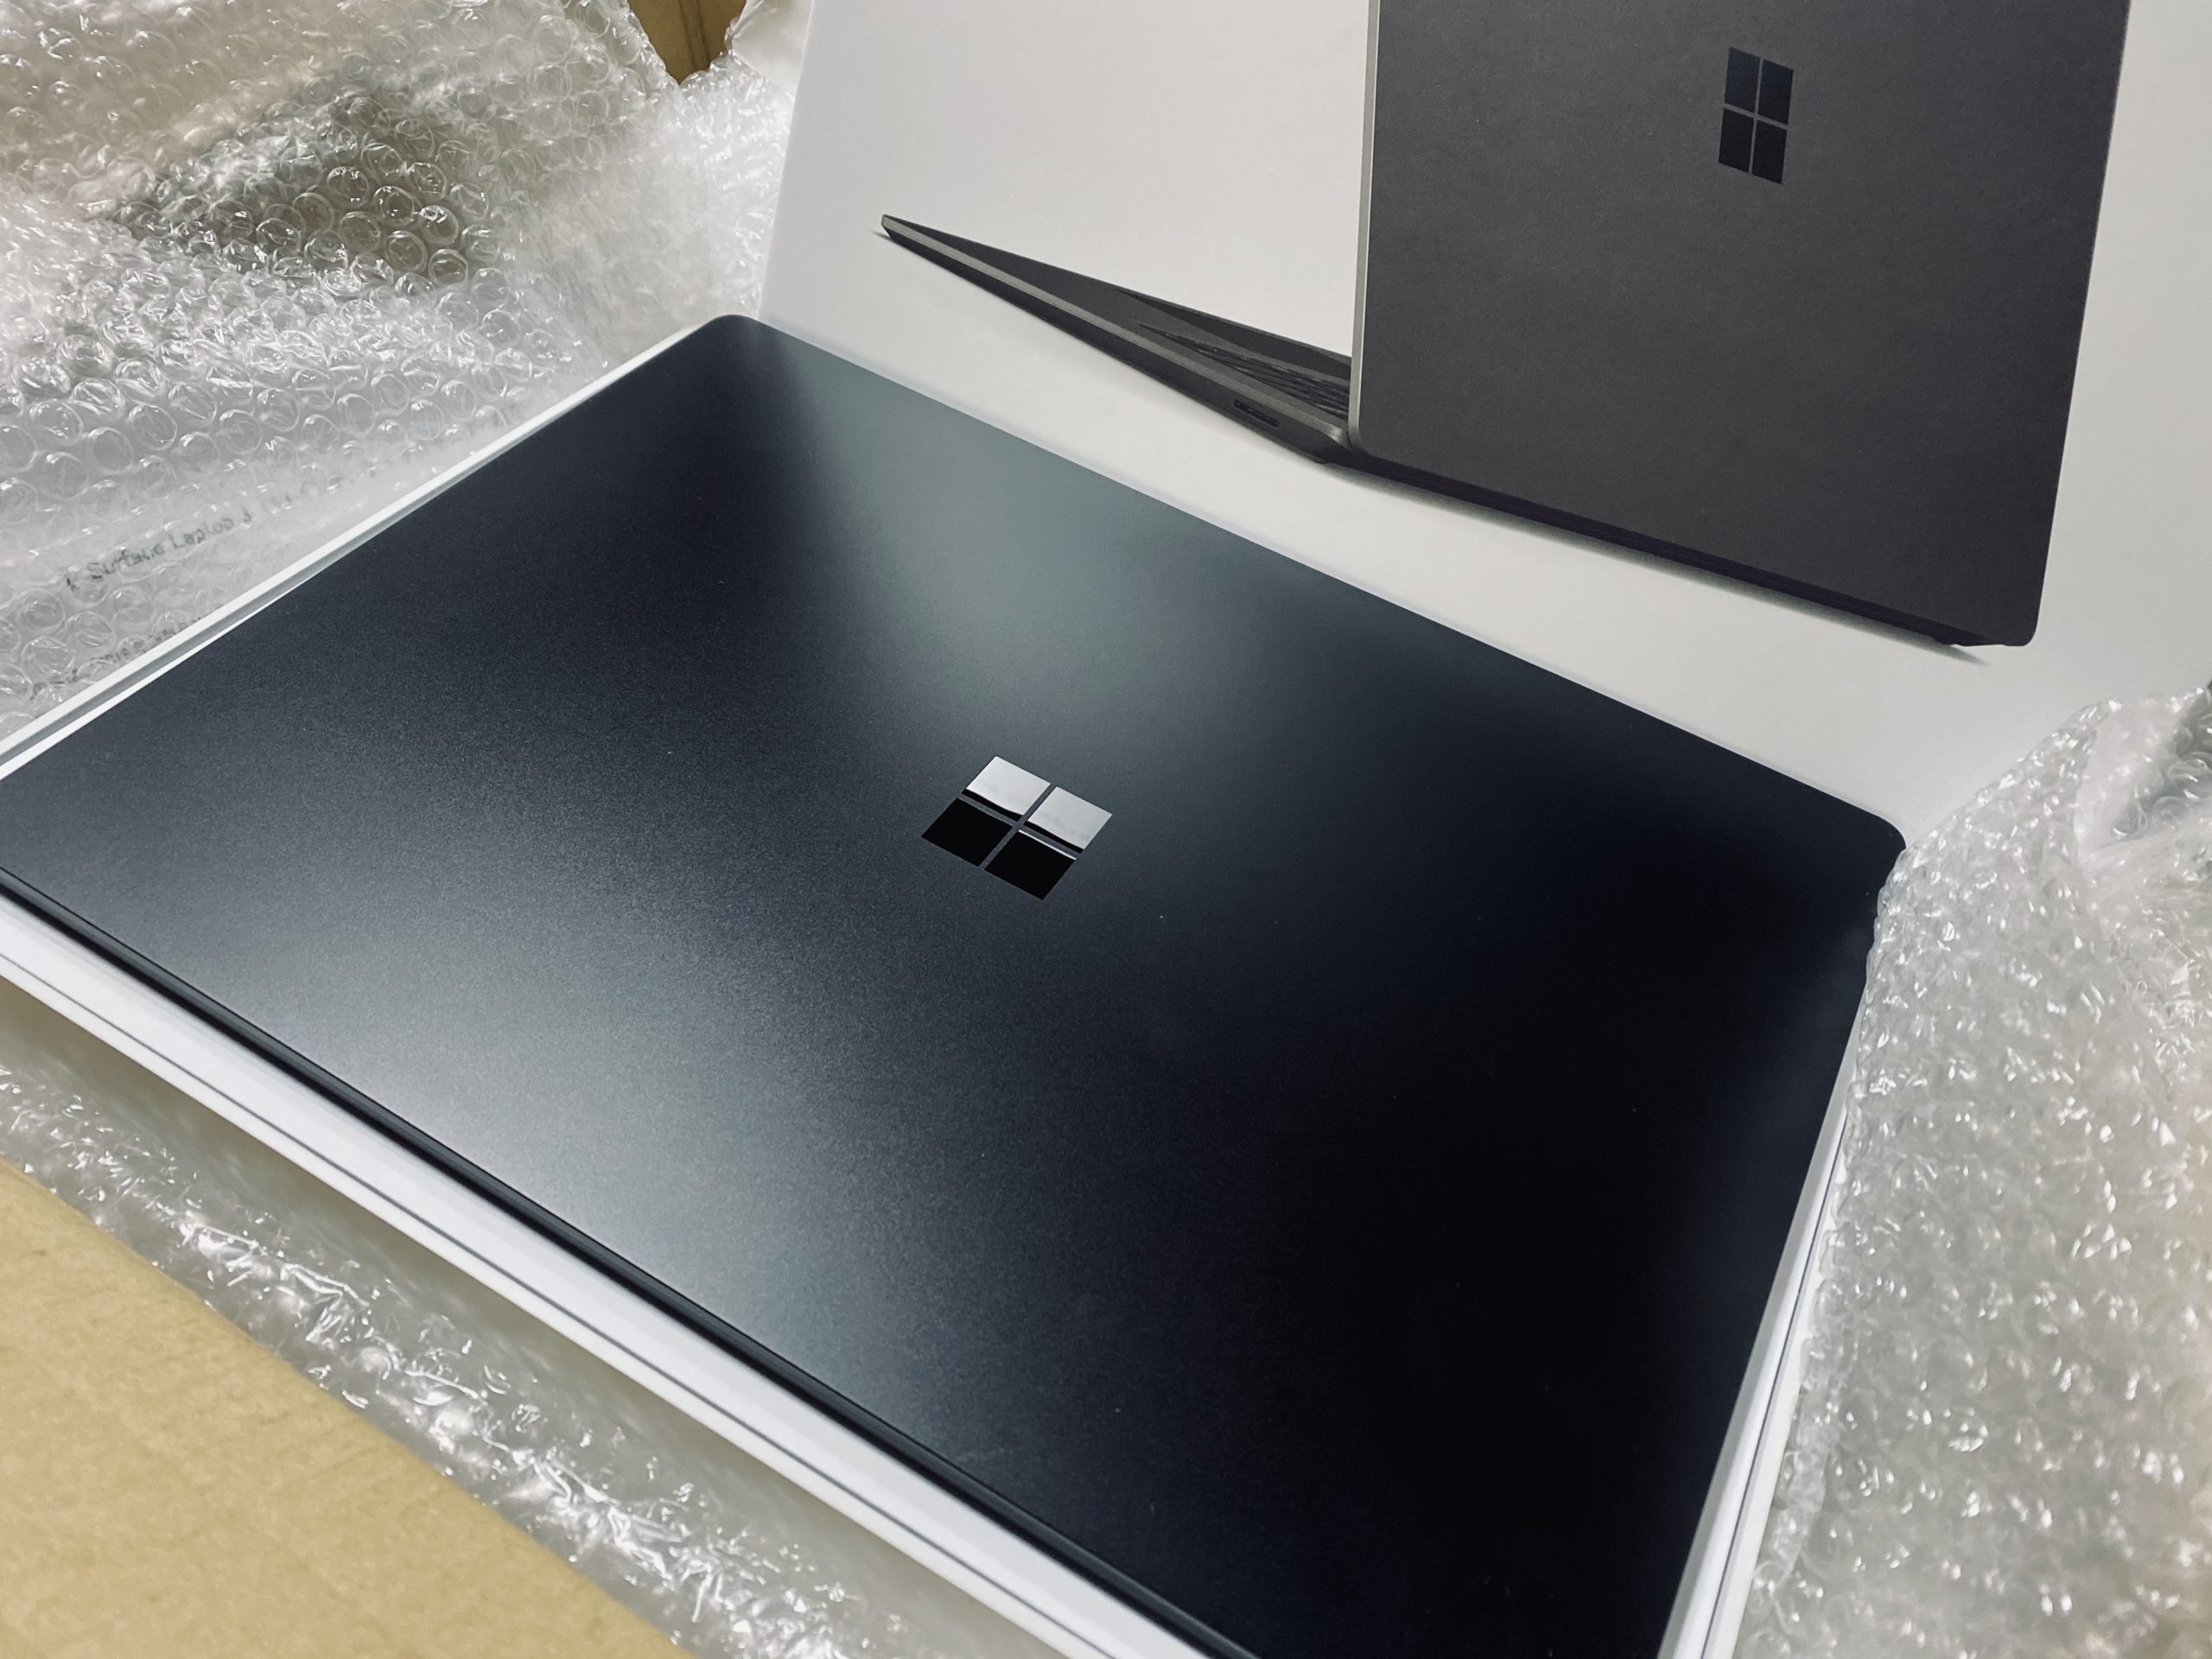 I’ll review Surface Laptop 3 as Surface Ambassador - Microsoft New Product Notebook Review 2019